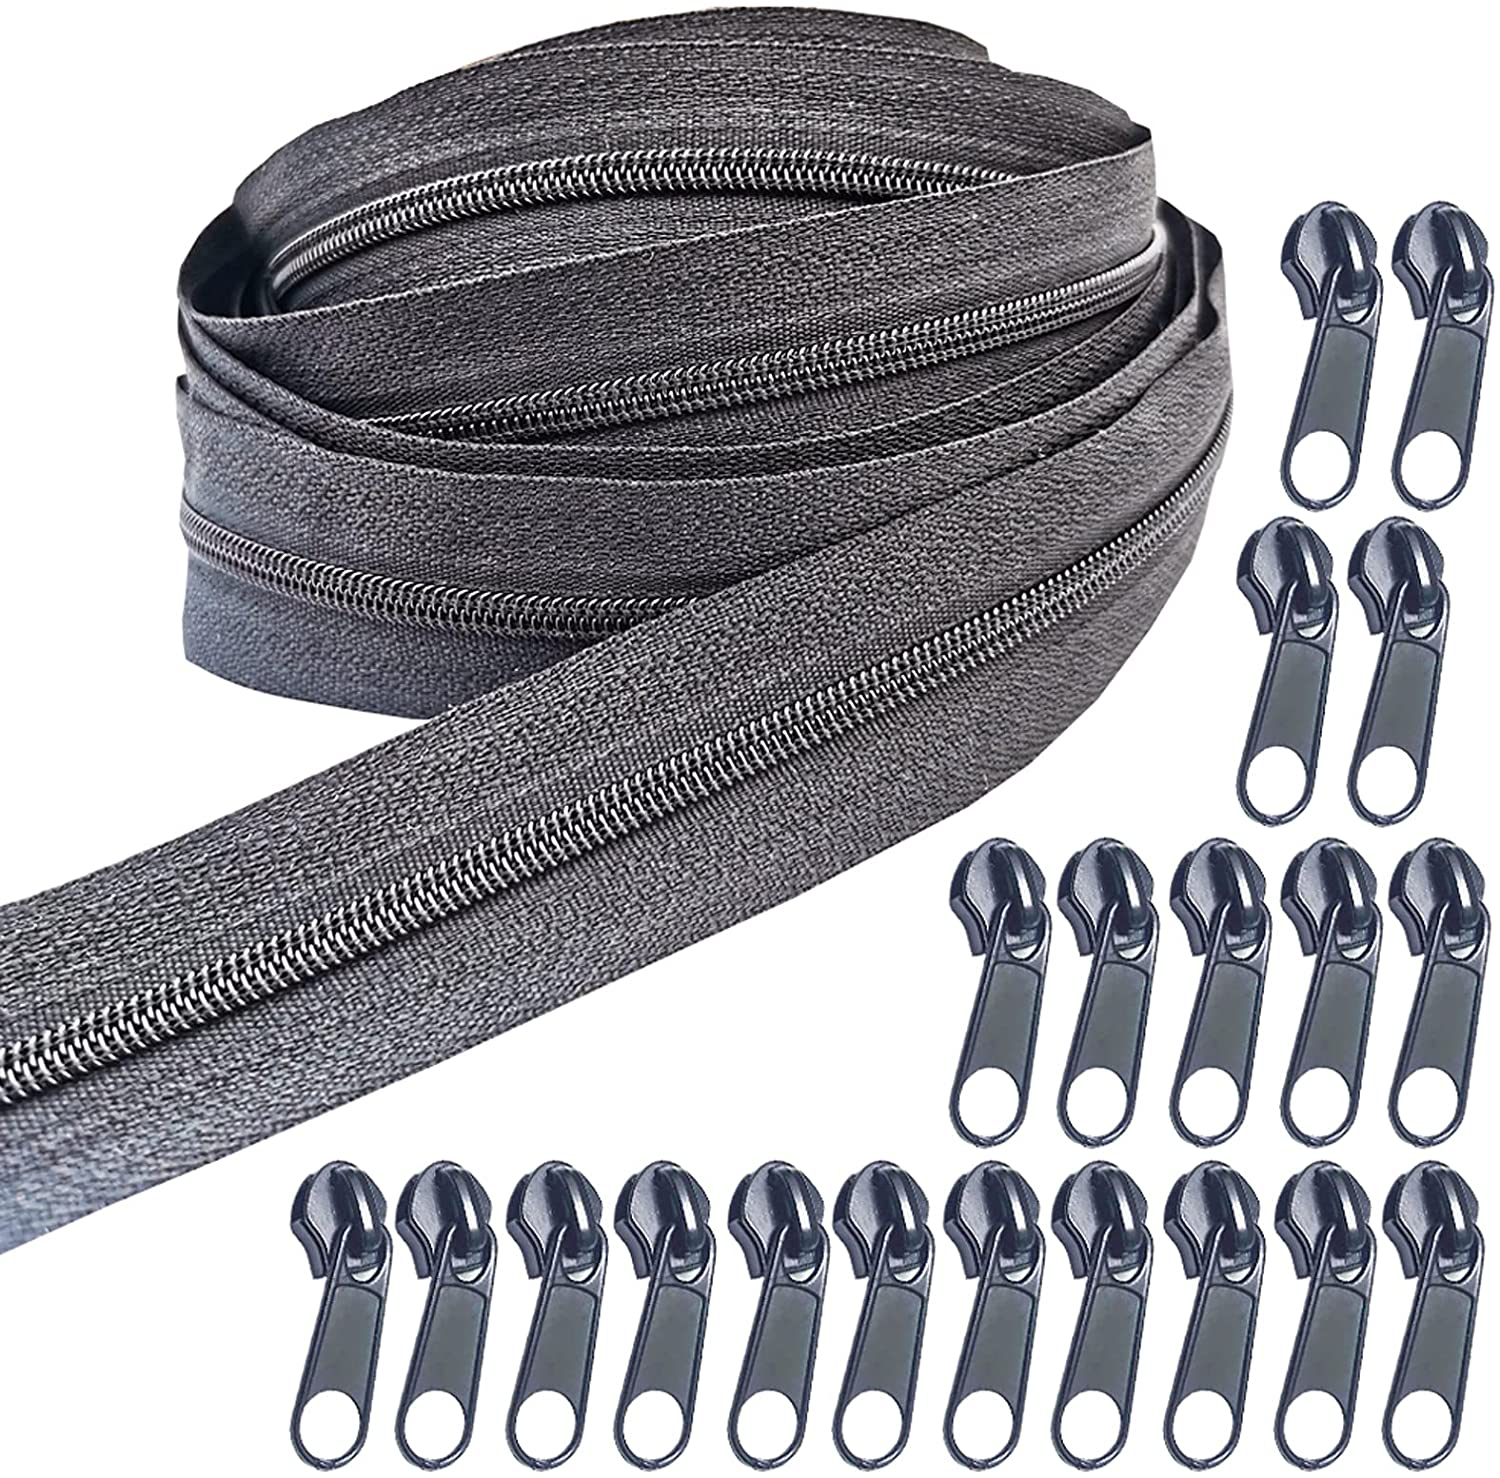 10 Yards Zipper Repair Kit for Upholstery Sewing with 20 Zipper